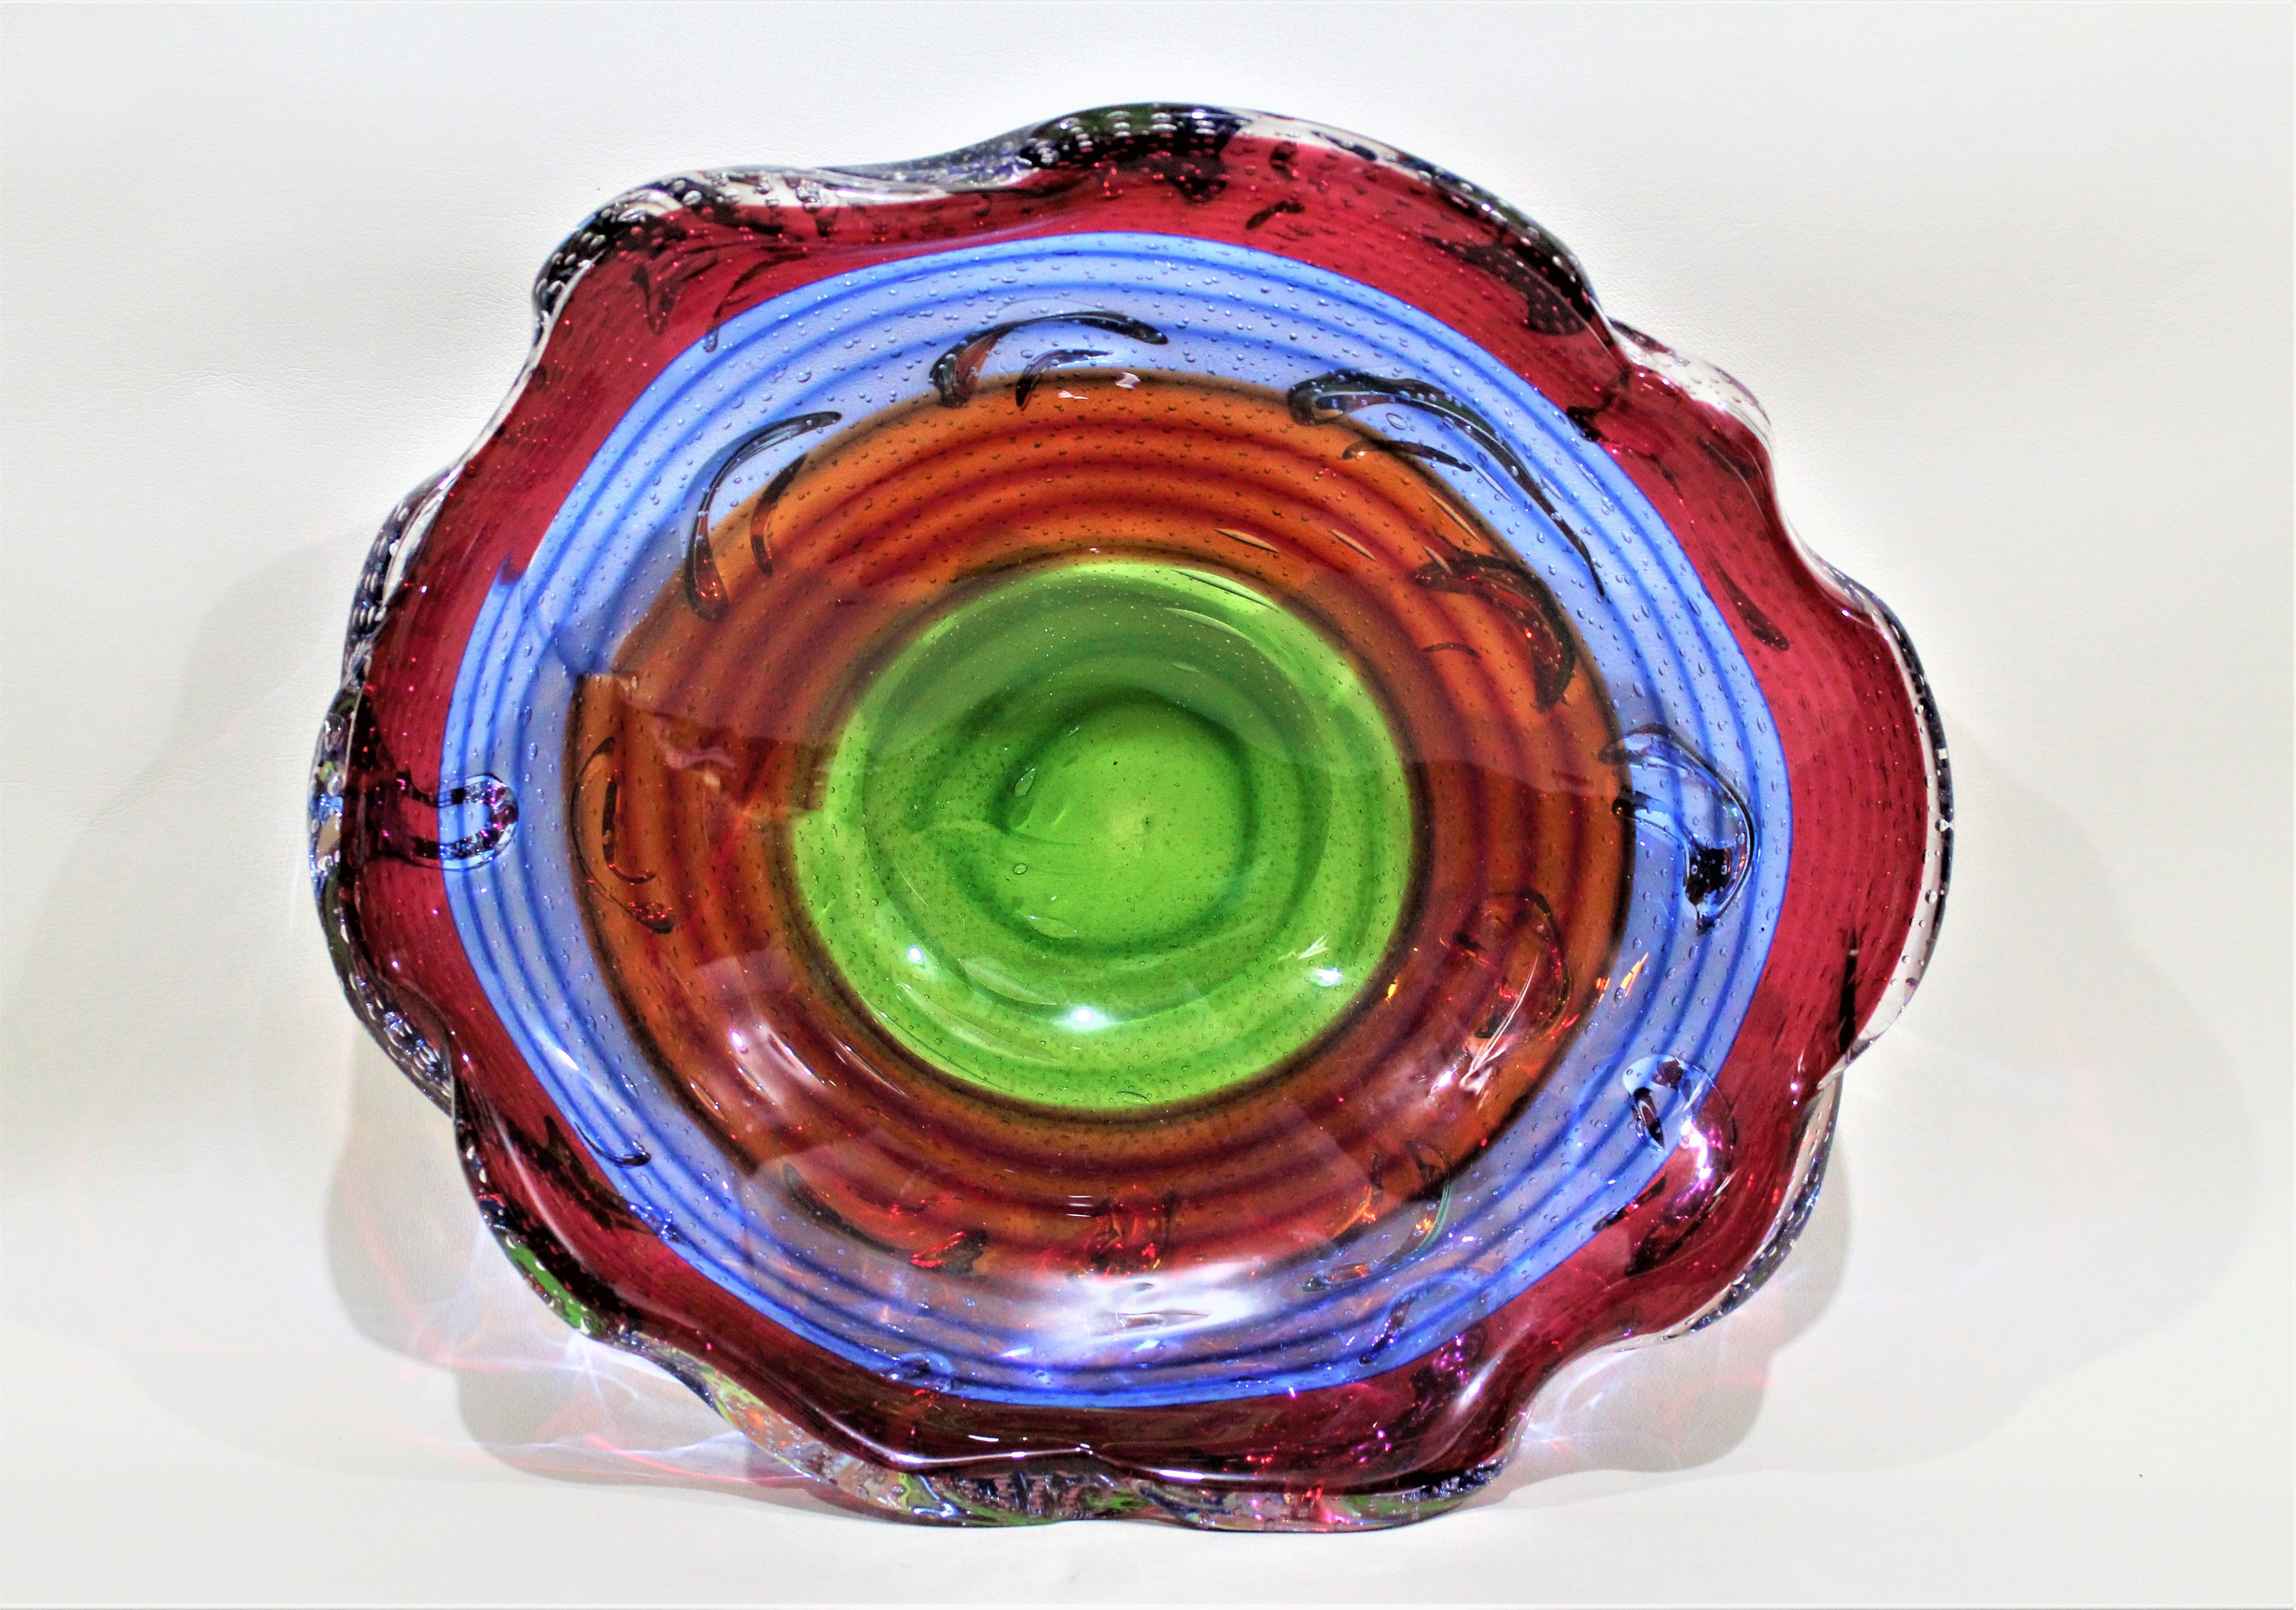 Constructed of multicolored glass cording, this coiled bowl was most likely made by an Italian artisan during the mid-1960s. The bowl is unsigned, so an exact artist or maker cannot be determined. The bowl is not perfectly circular in shape and was